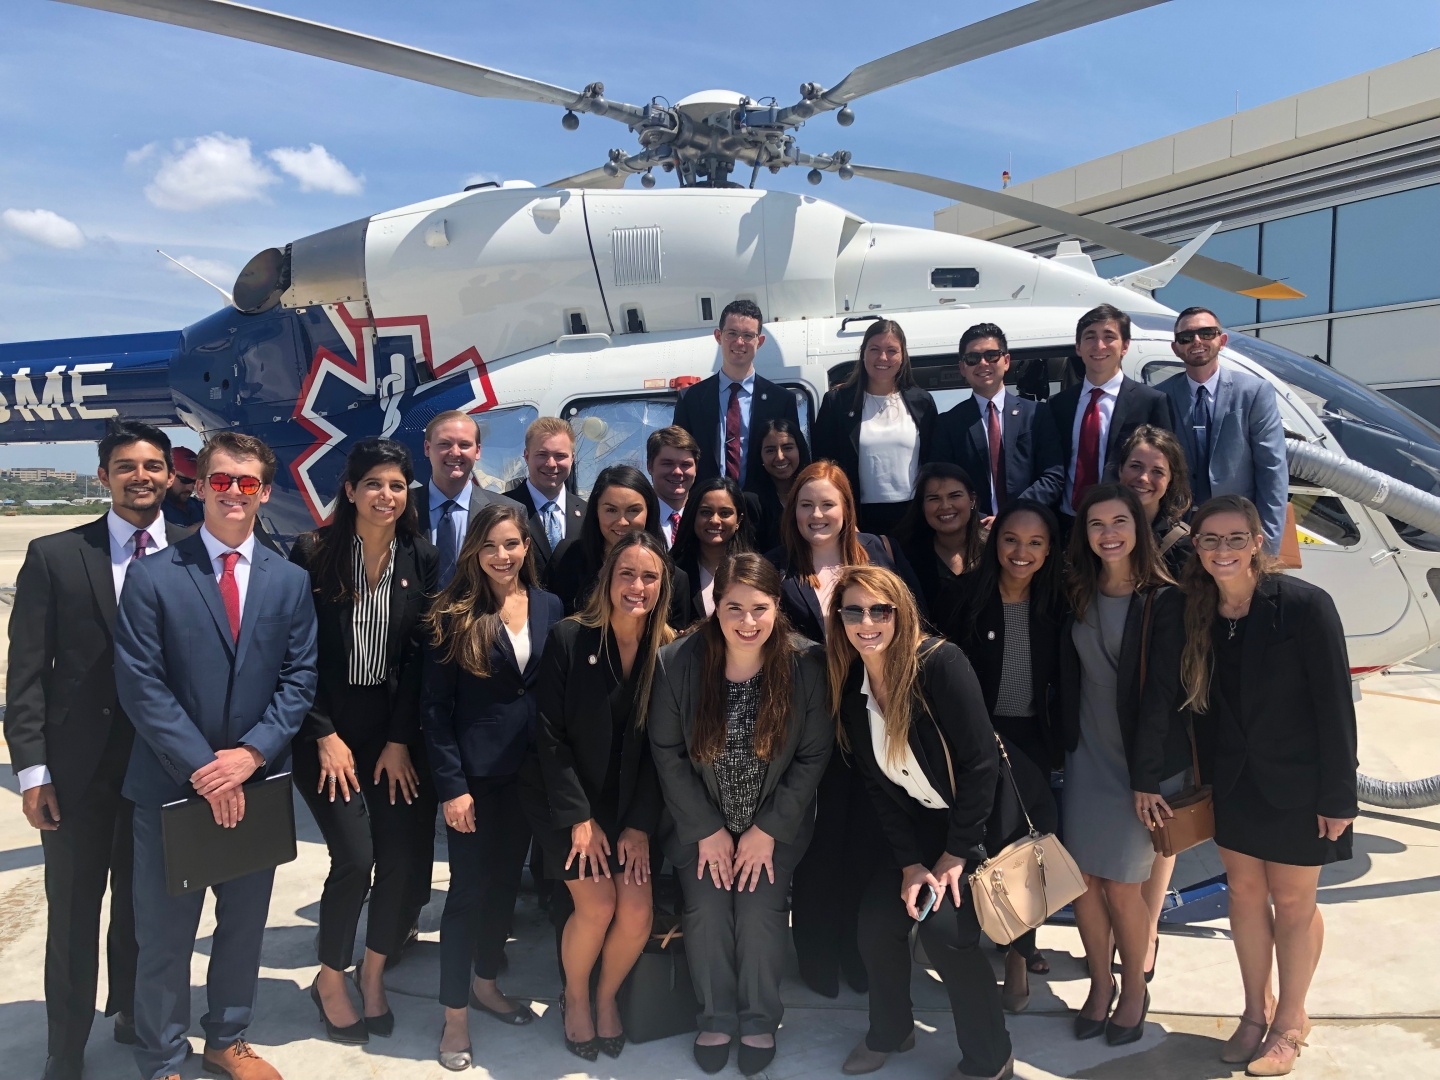 Graduate students gather in front of a rescue helicopter while visiting a local hospital.